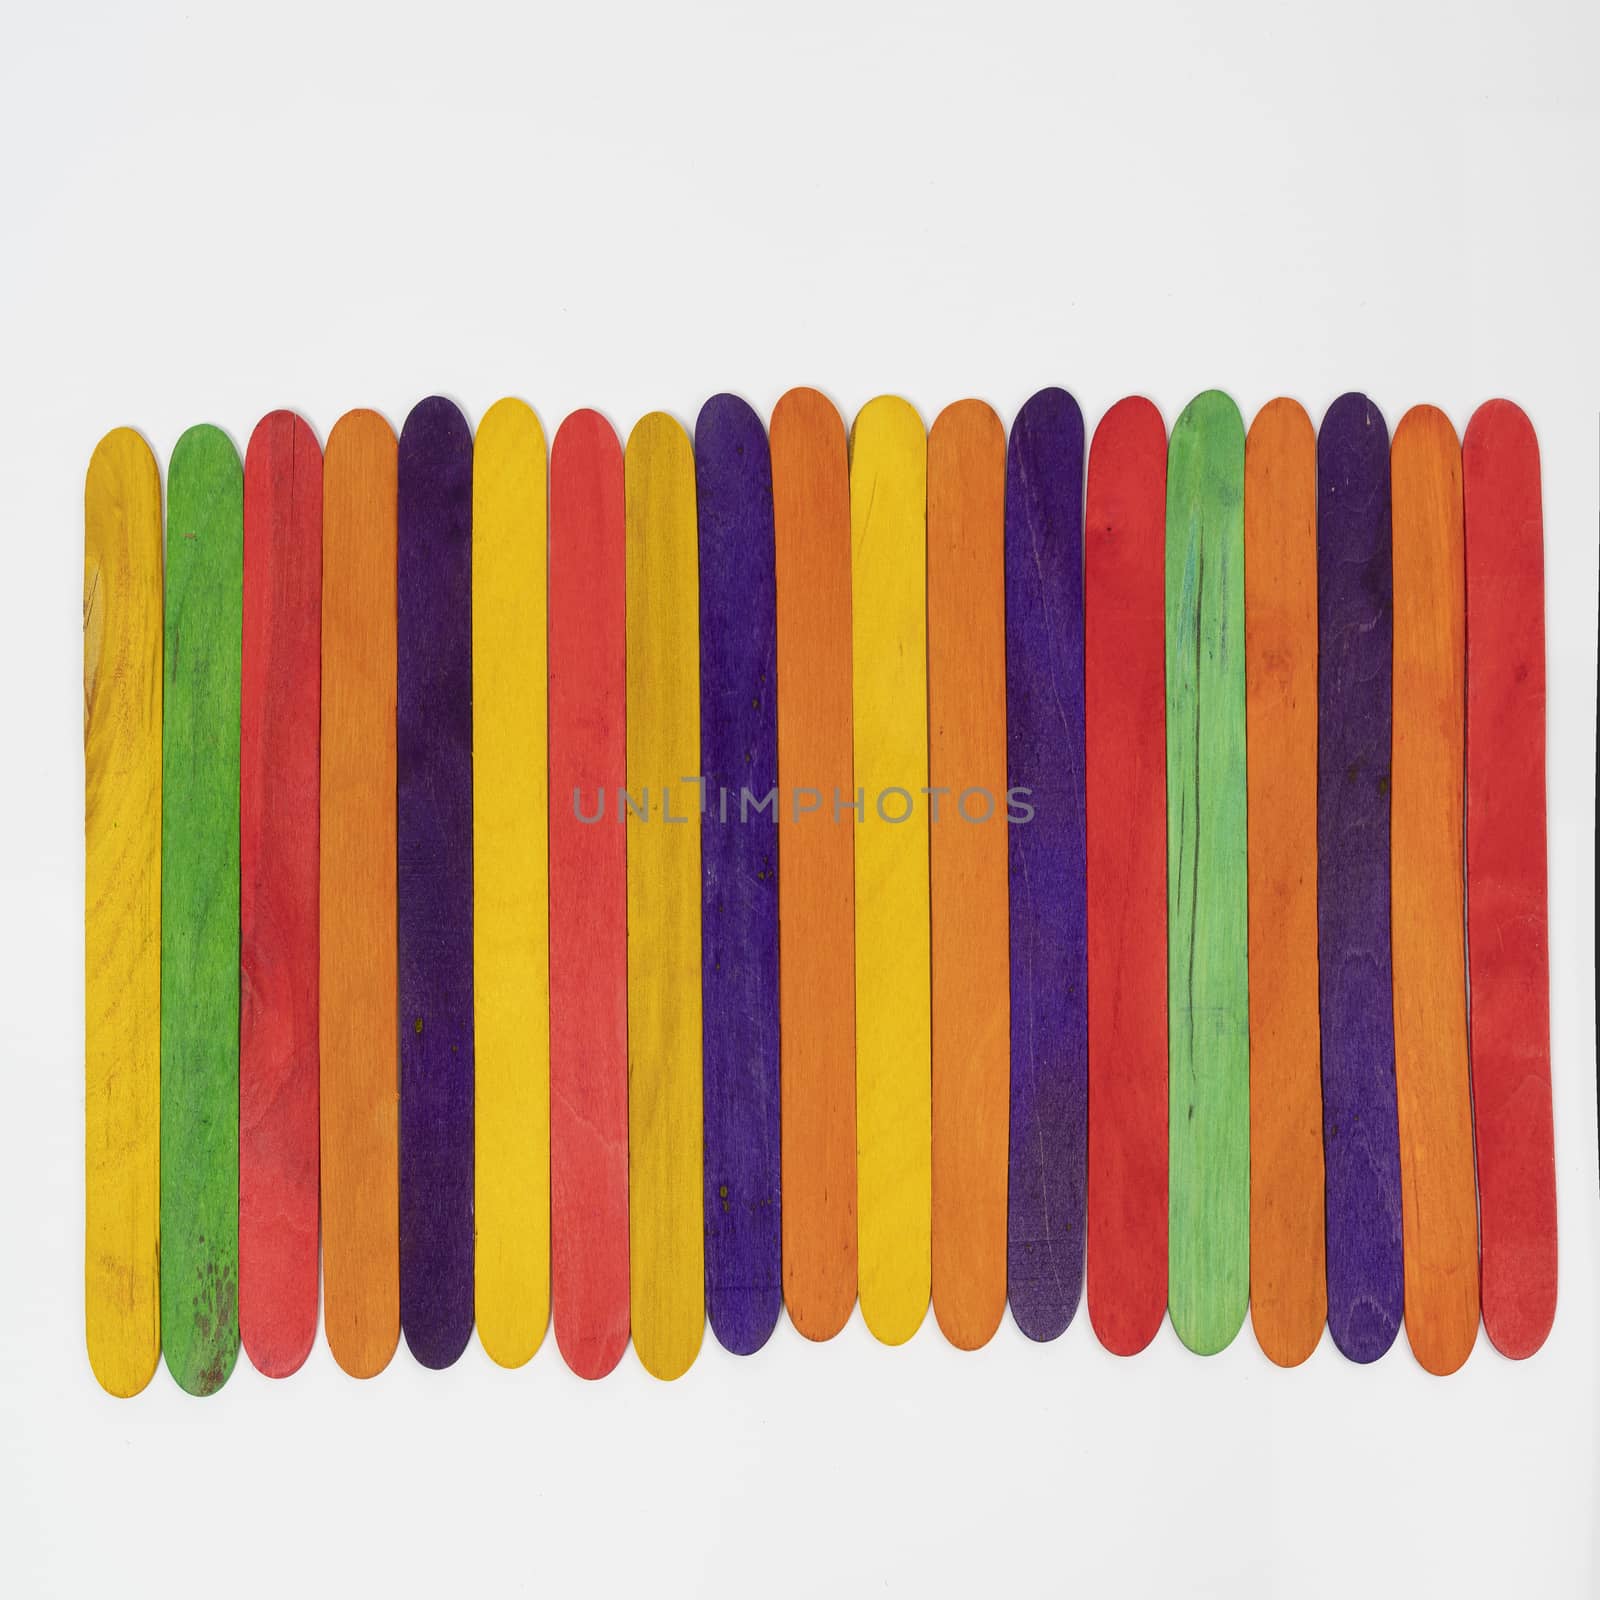 some colored wooden slats arranged on a white surface